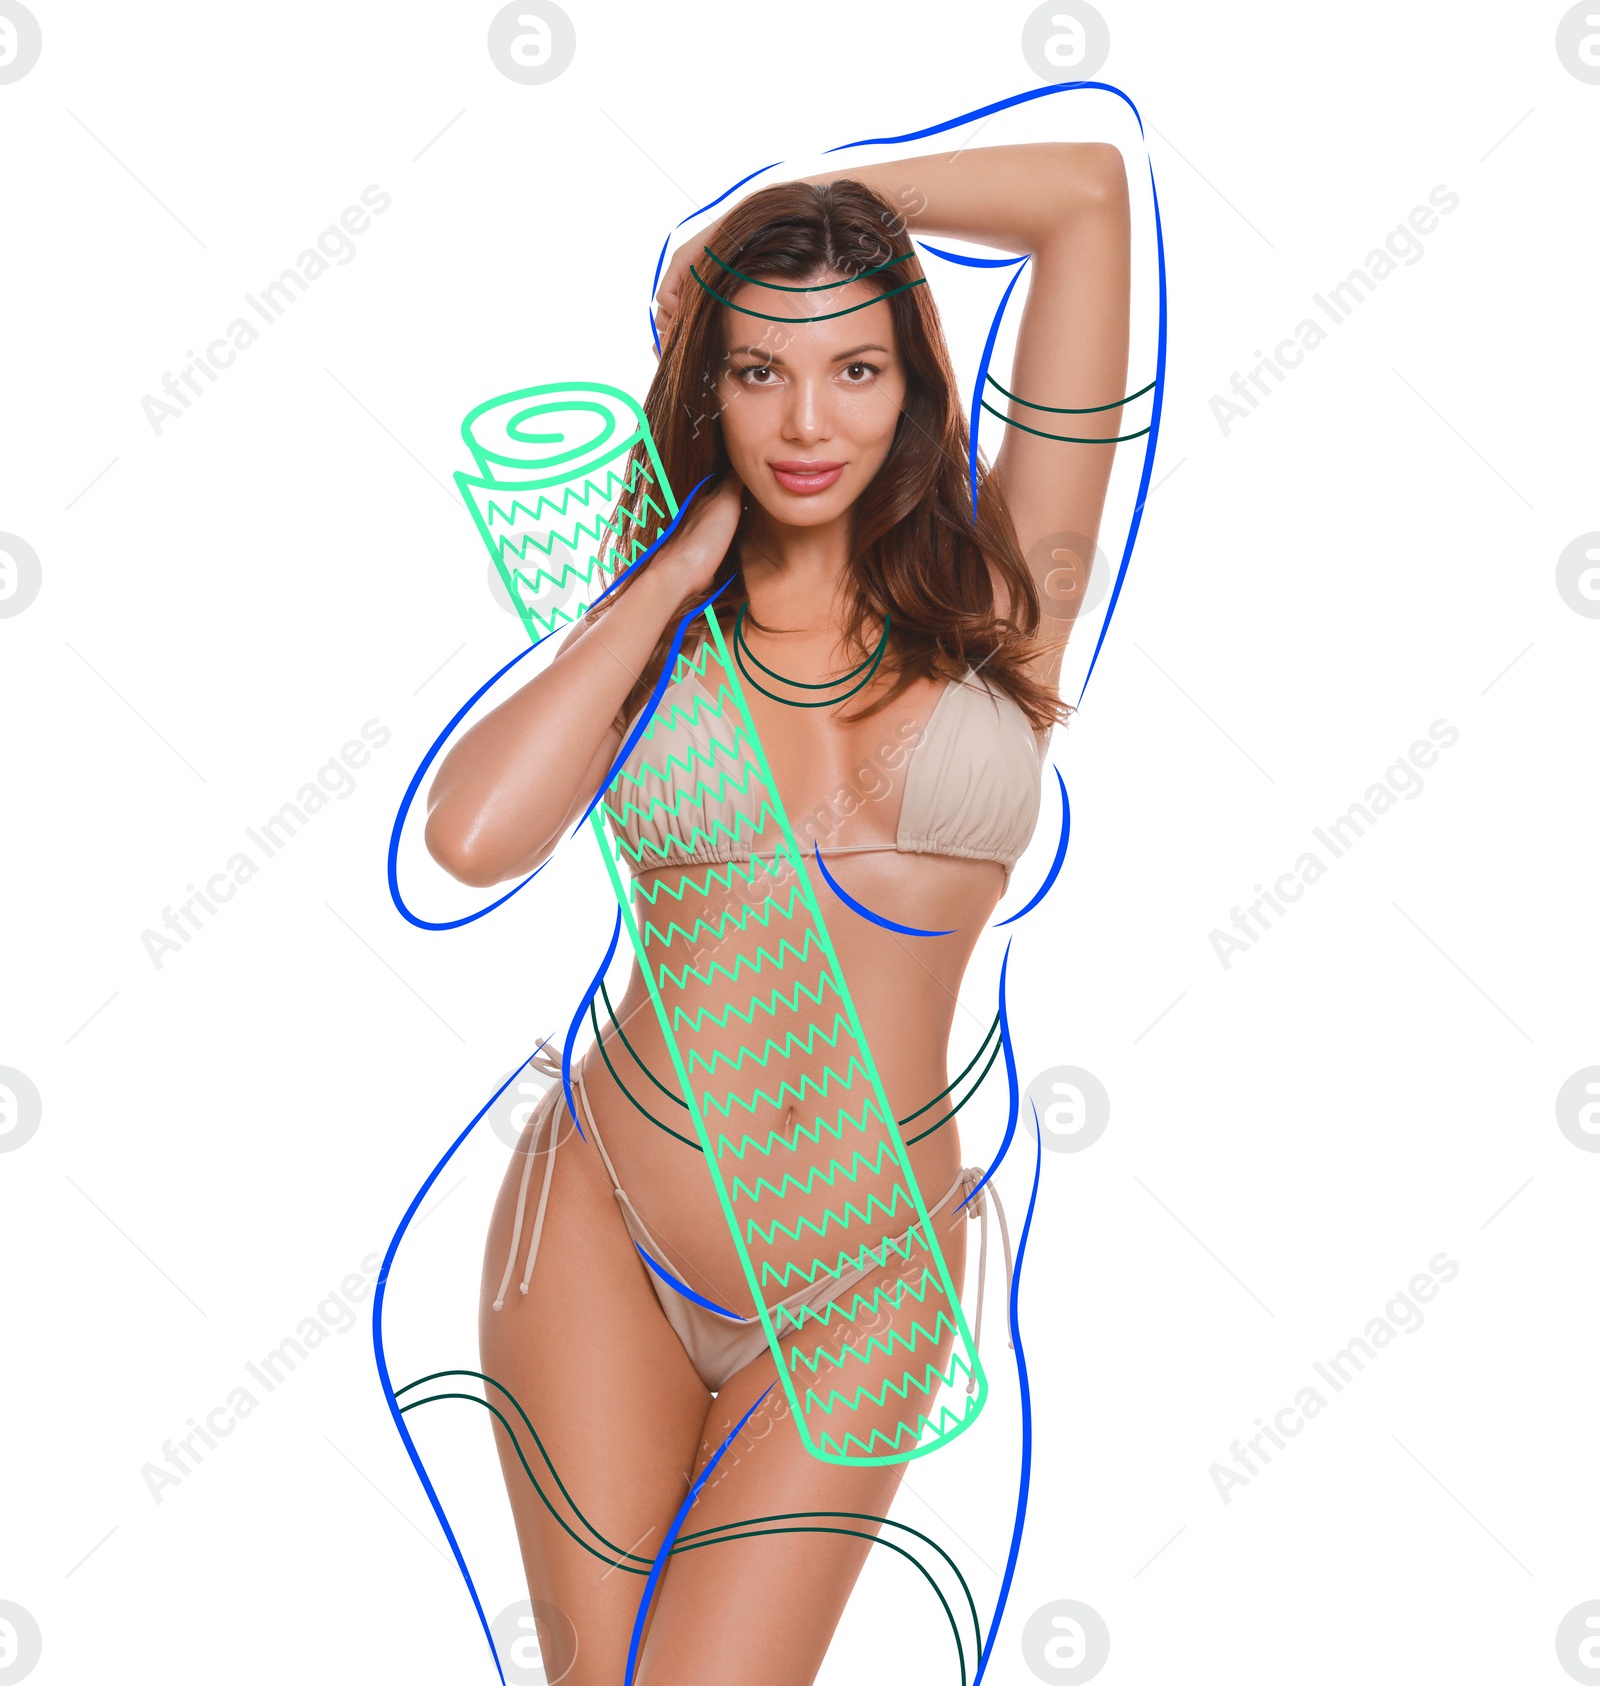 Image of Beautiful slim woman in swimsuit on white background. Outline with exercise mat as her overweight figure before workout